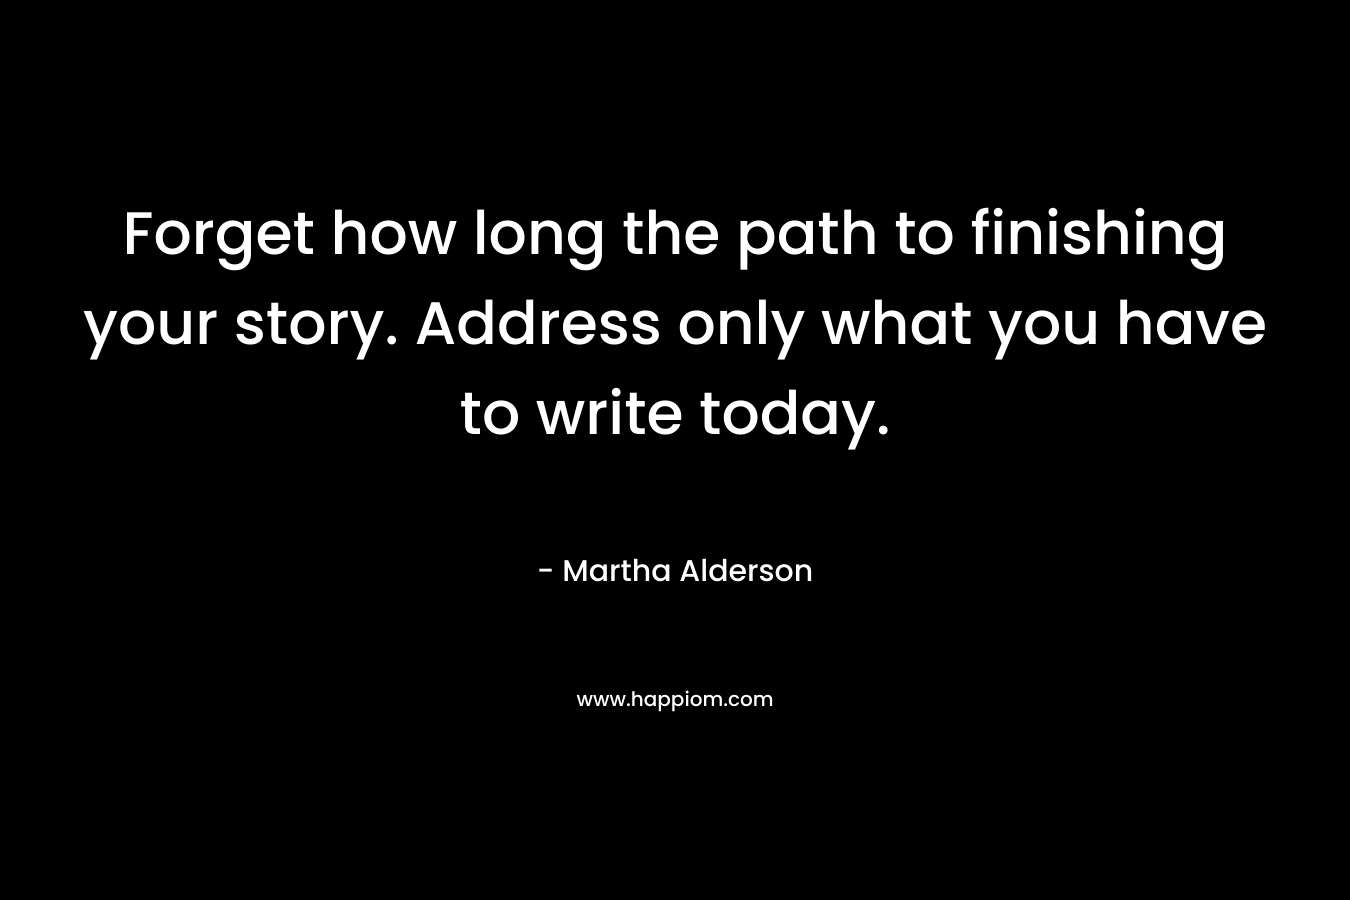 Forget how long the path to finishing your story. Address only what you have to write today.